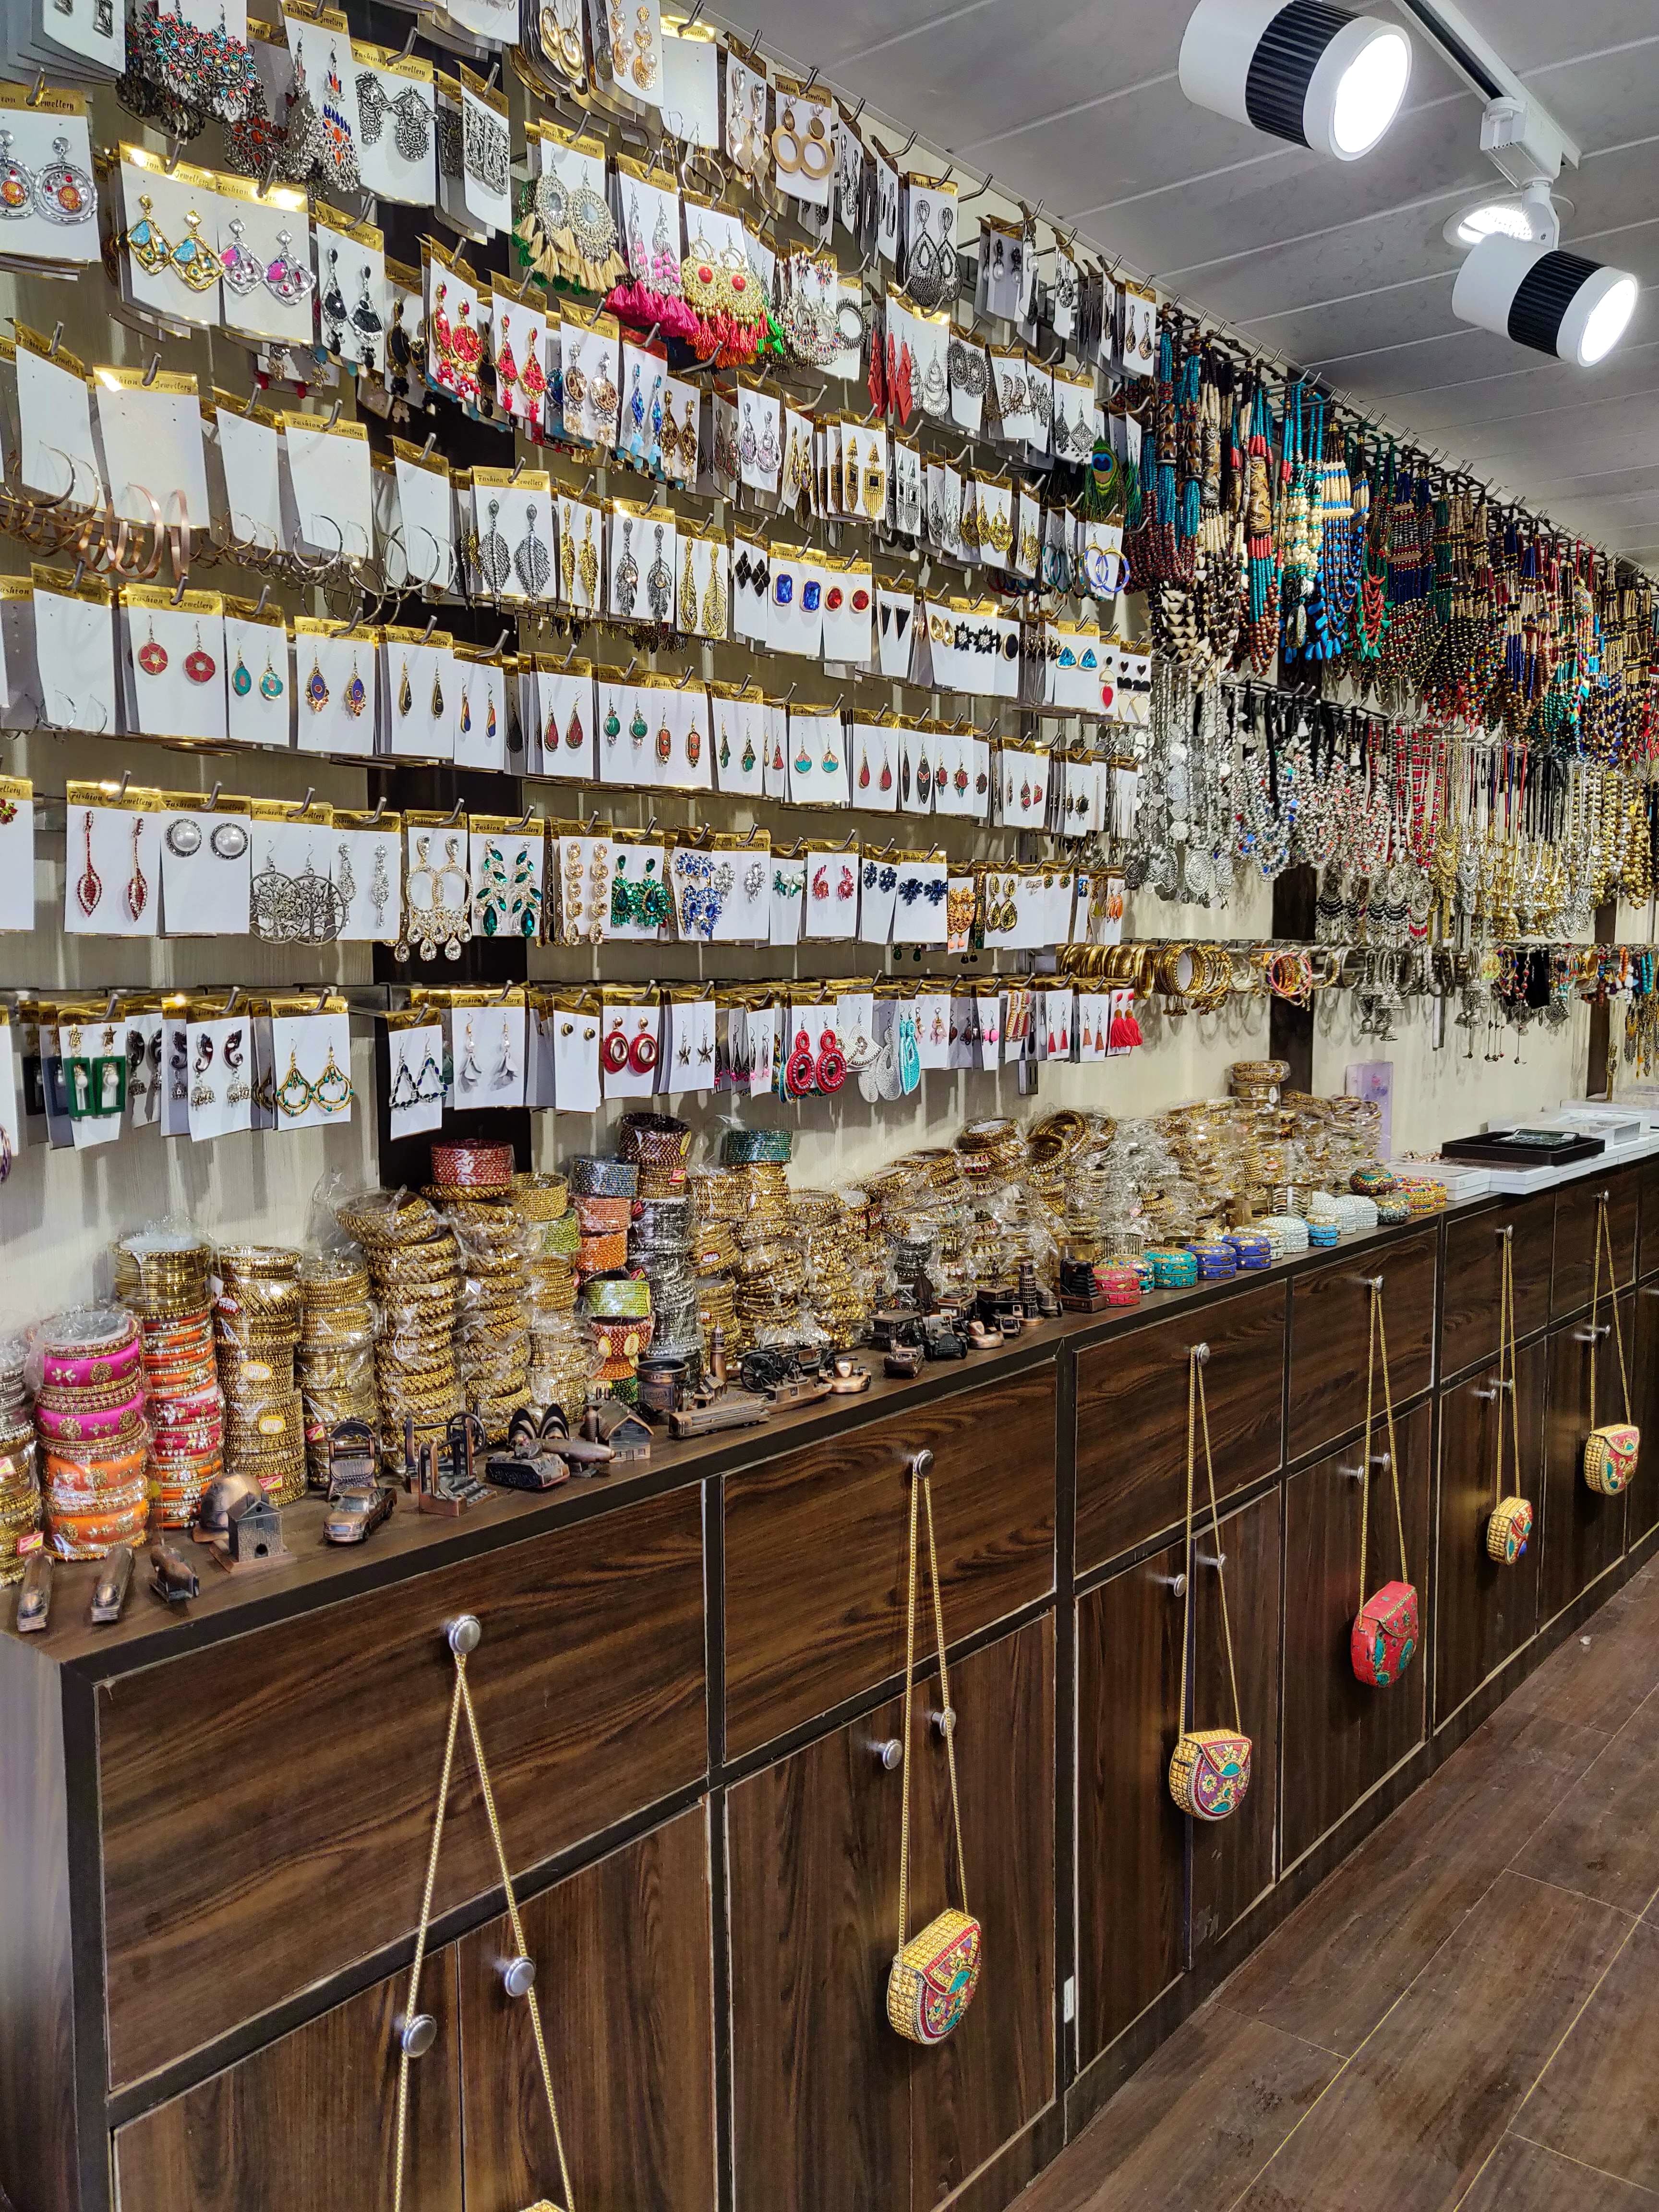 Building,Product,Retail,Shelf,Inventory,Collection,Liquor store,Interior design,Outlet store,Aisle